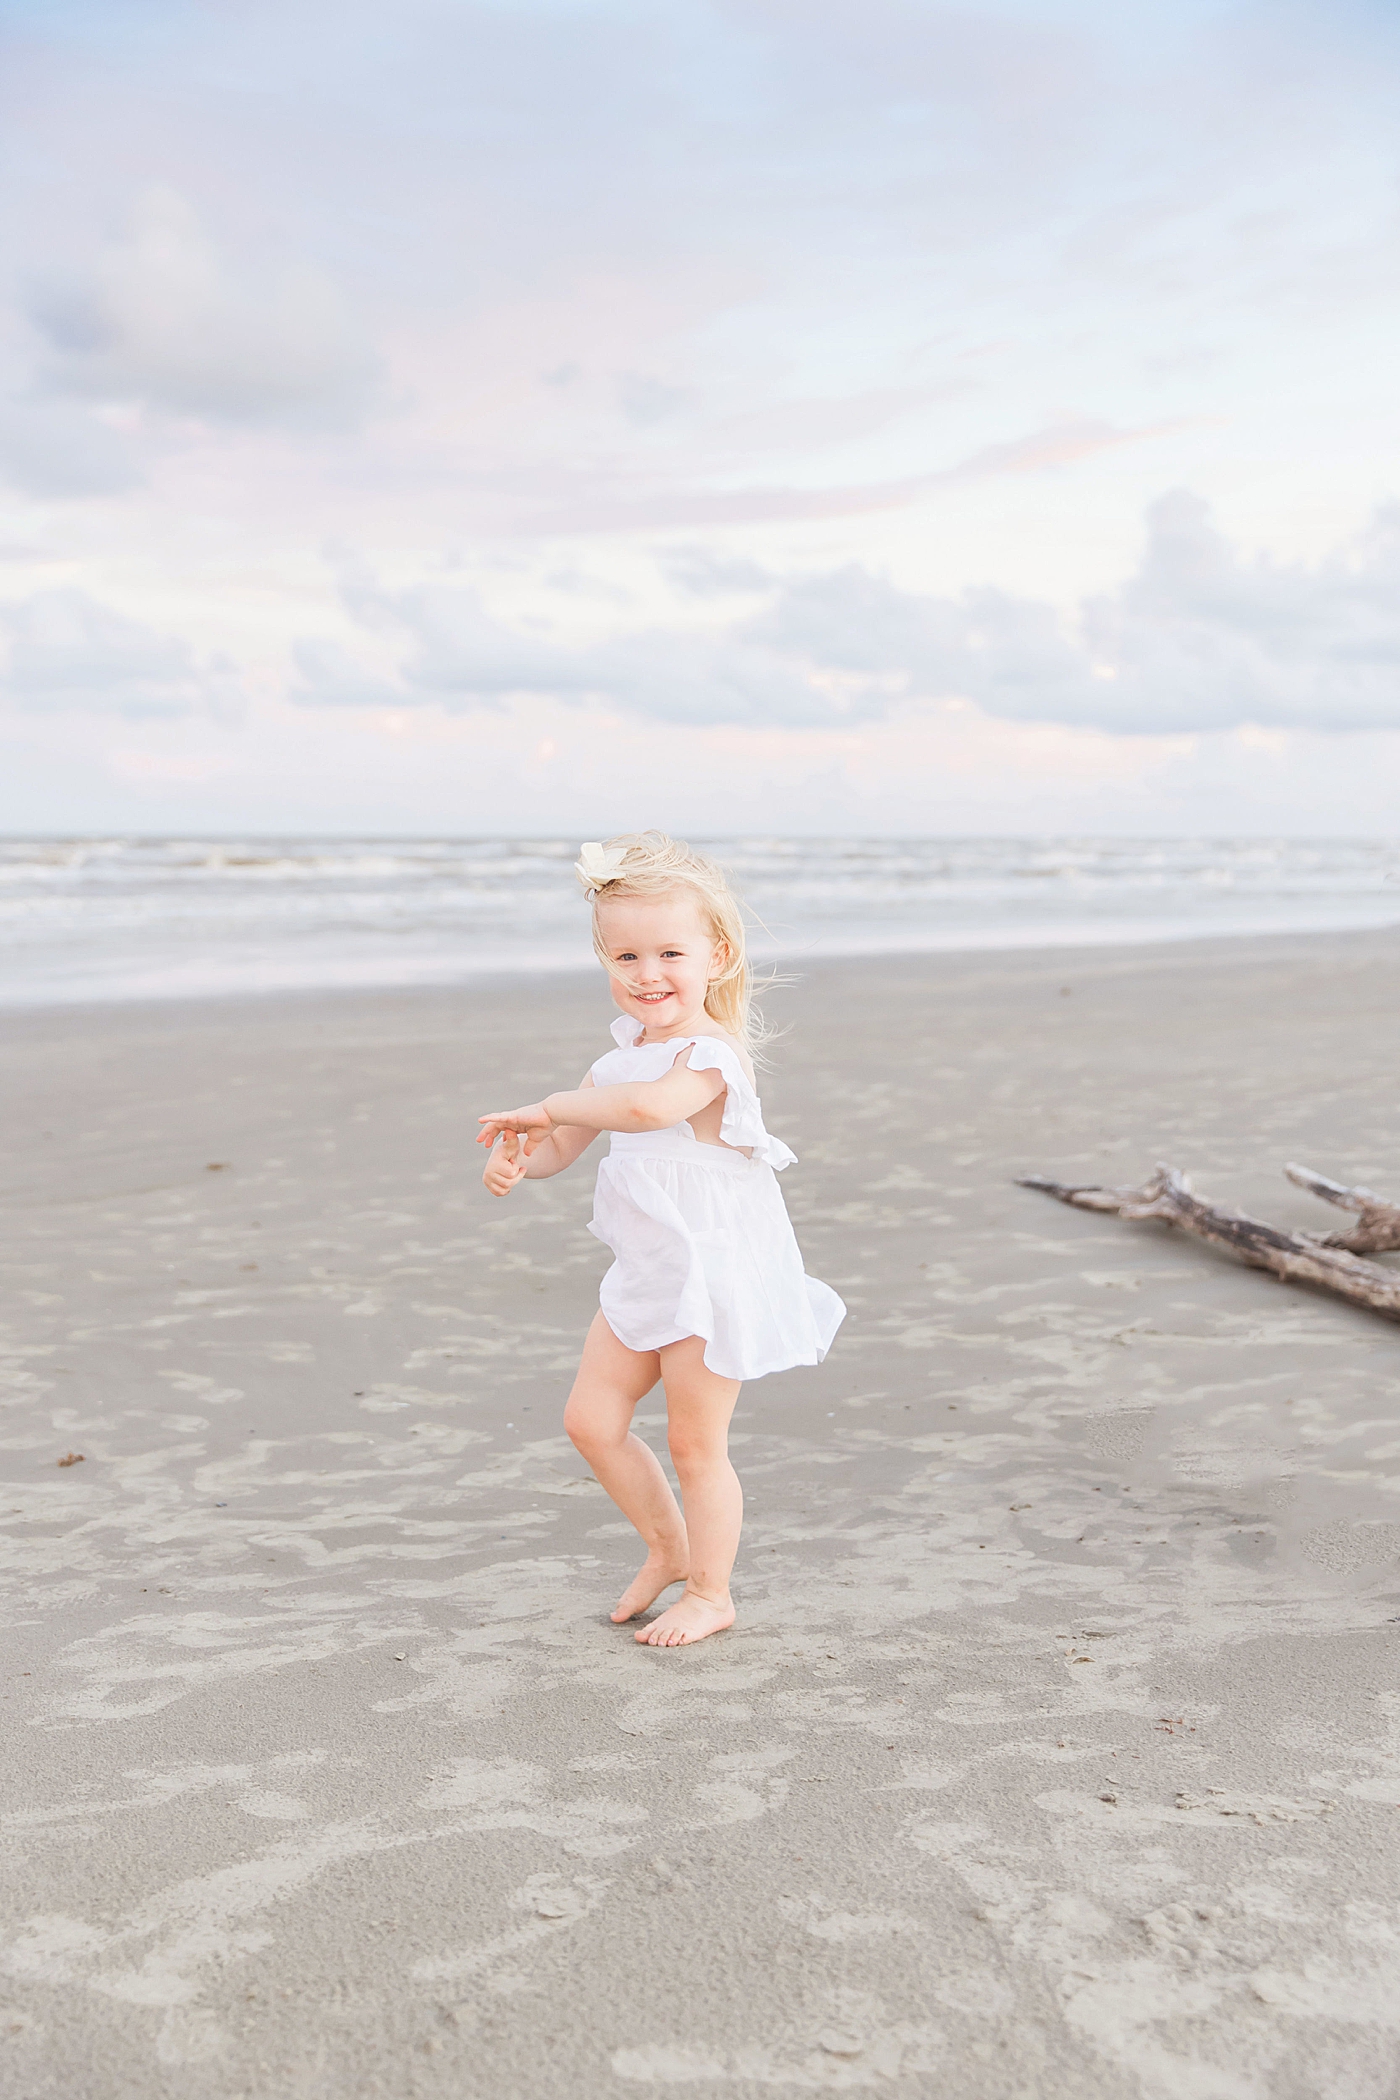 Toddler dancing on the beach during family photoshoot. Photo by Fresh Light Photography